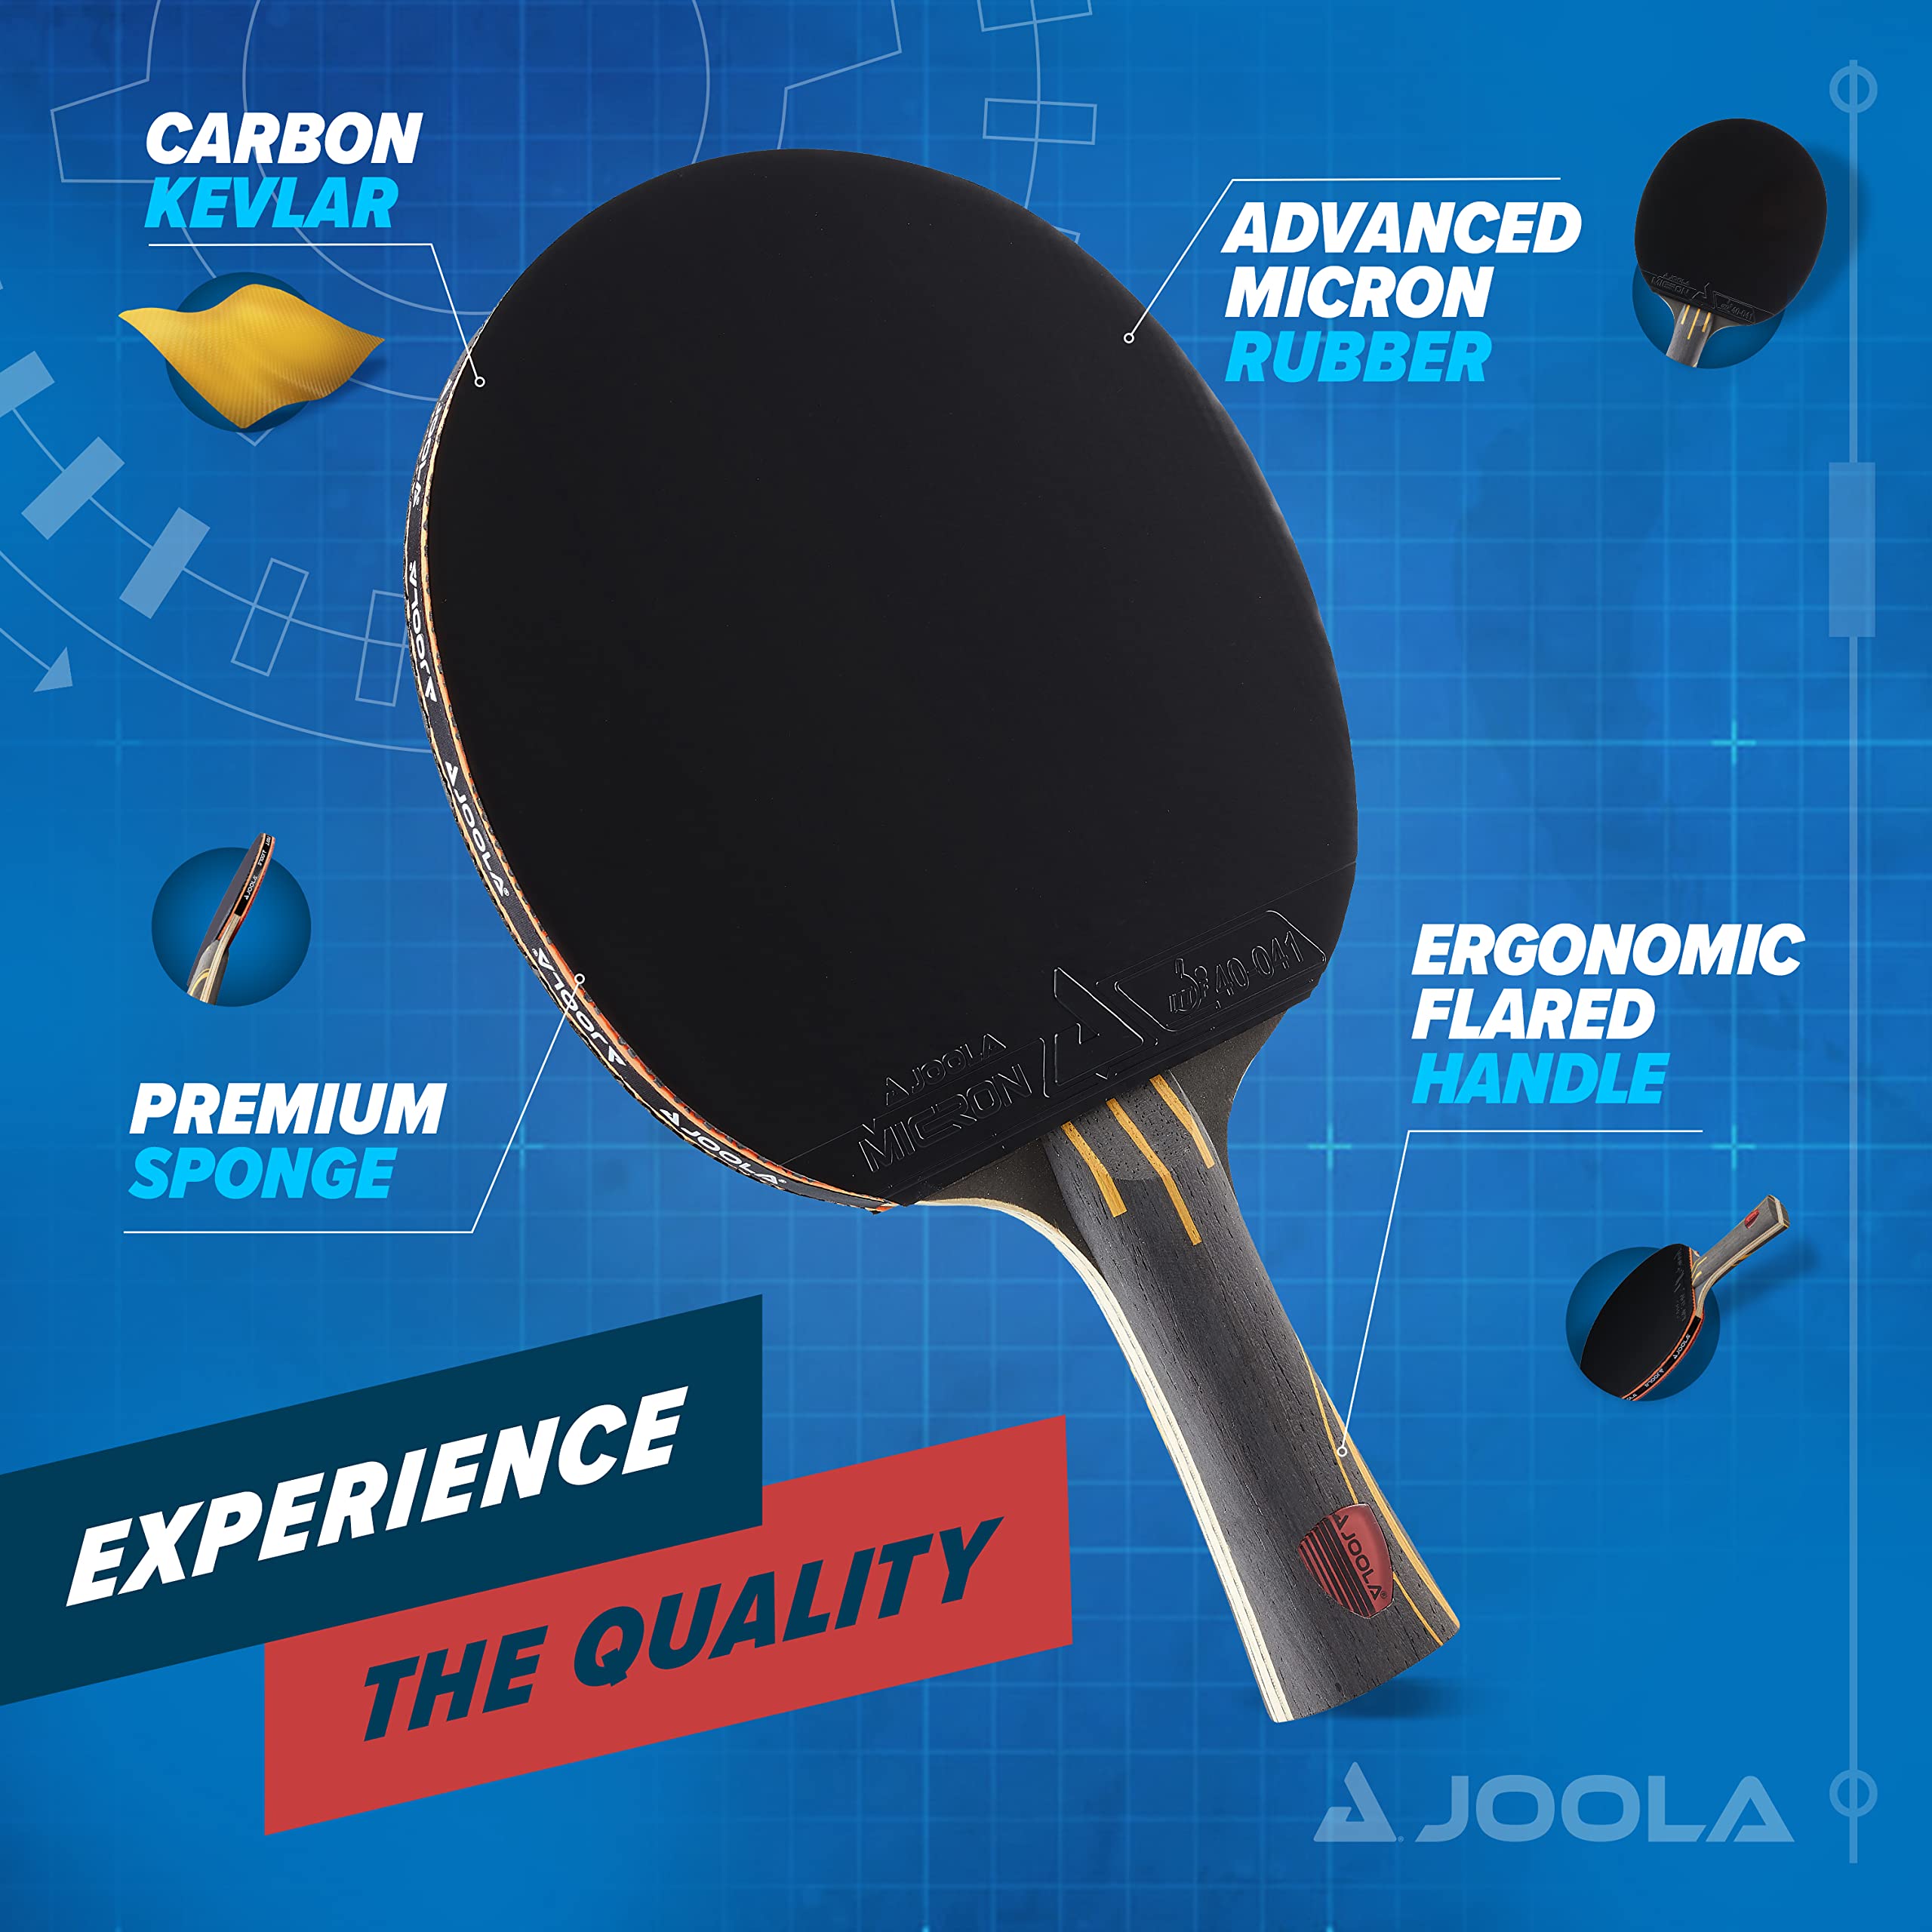 JOOLA Infinity Overdrive - Professional Performance Ping Pong Paddle with Carbon Kevlar Technology - Black Rubber on Both Sides